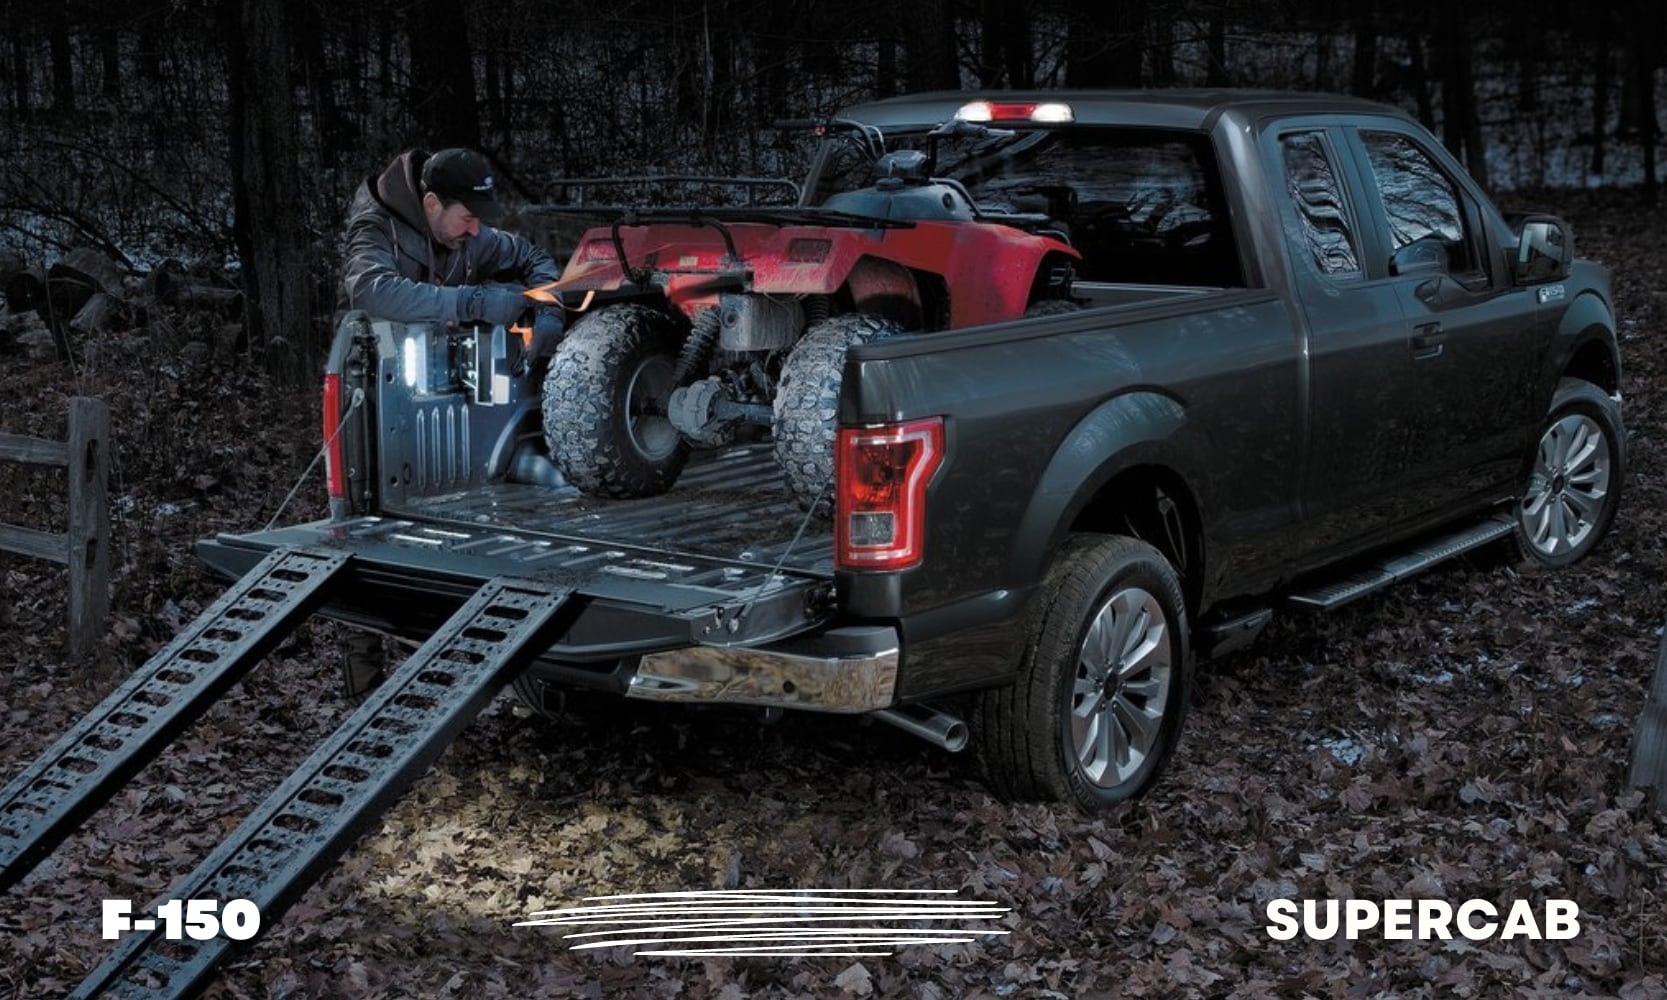 a dark gray used Ford F-150 SuperCab truck hauling an ATV in the truck bed parked in a forest with leaves on the ground